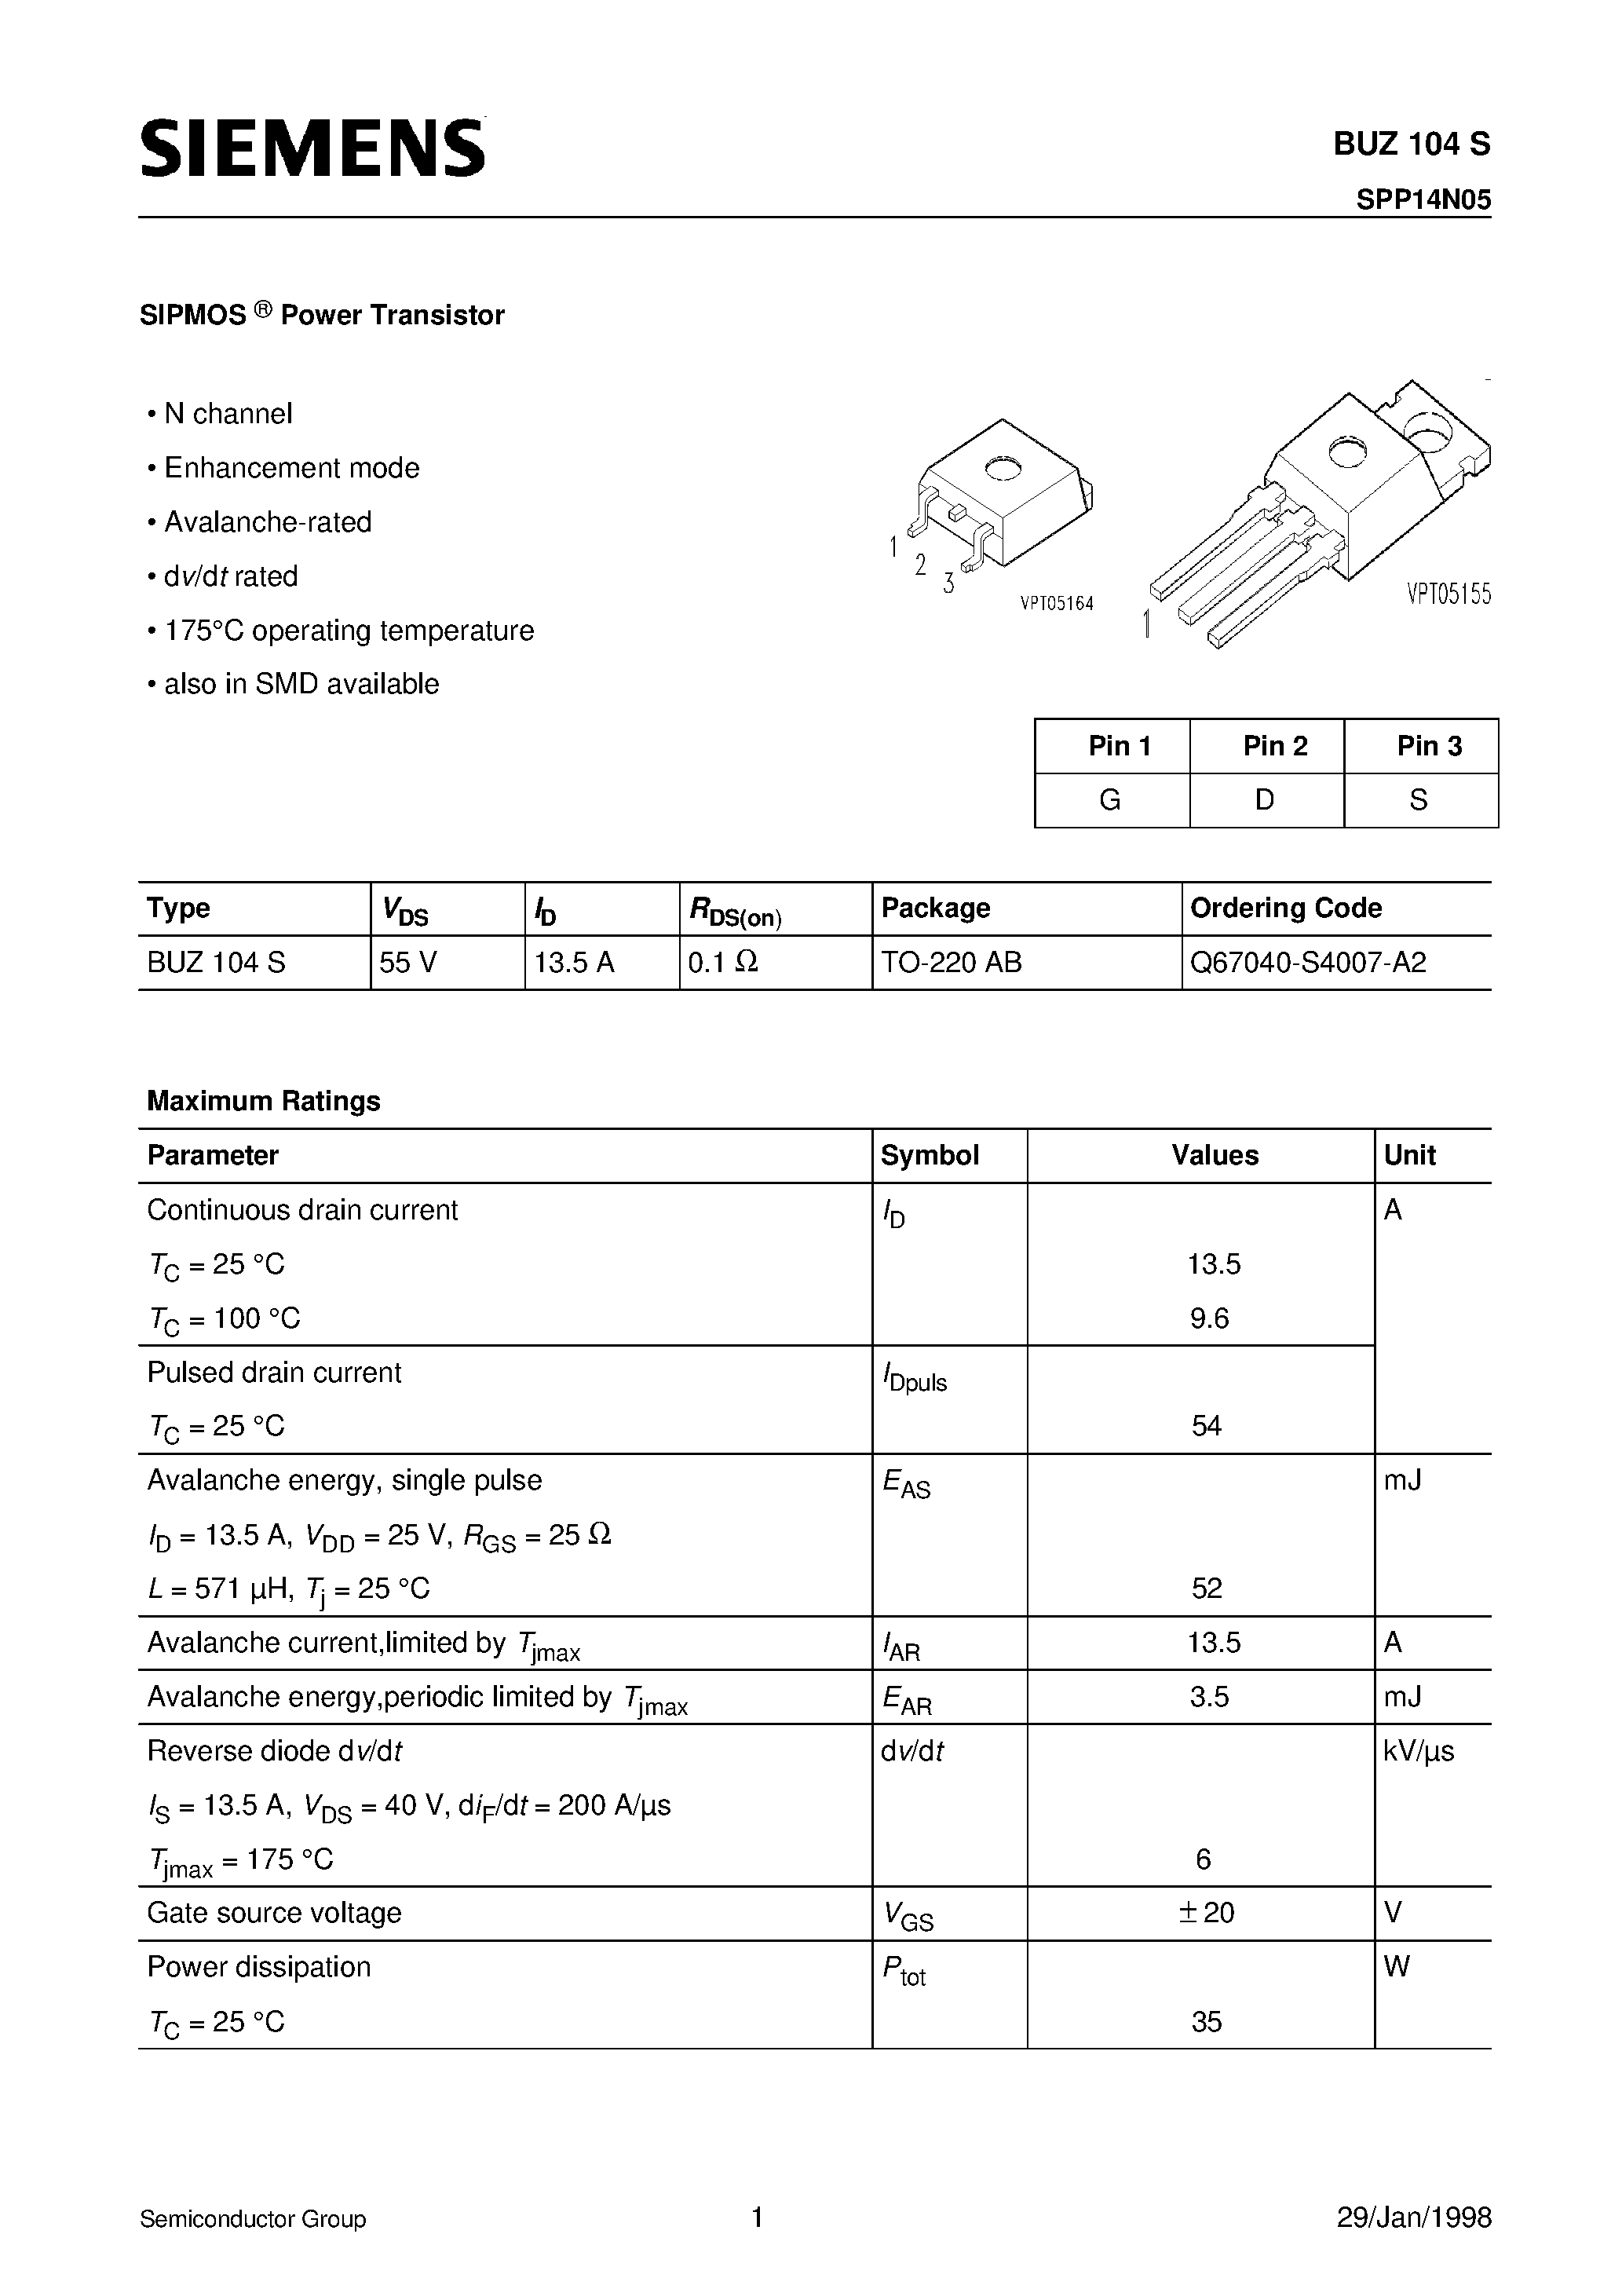 Datasheet BUZ104S - SIPMOS Power Transistor (N channel Enhancement mode Avalanche-rated dv/dt rated 175C operating temperature) page 1